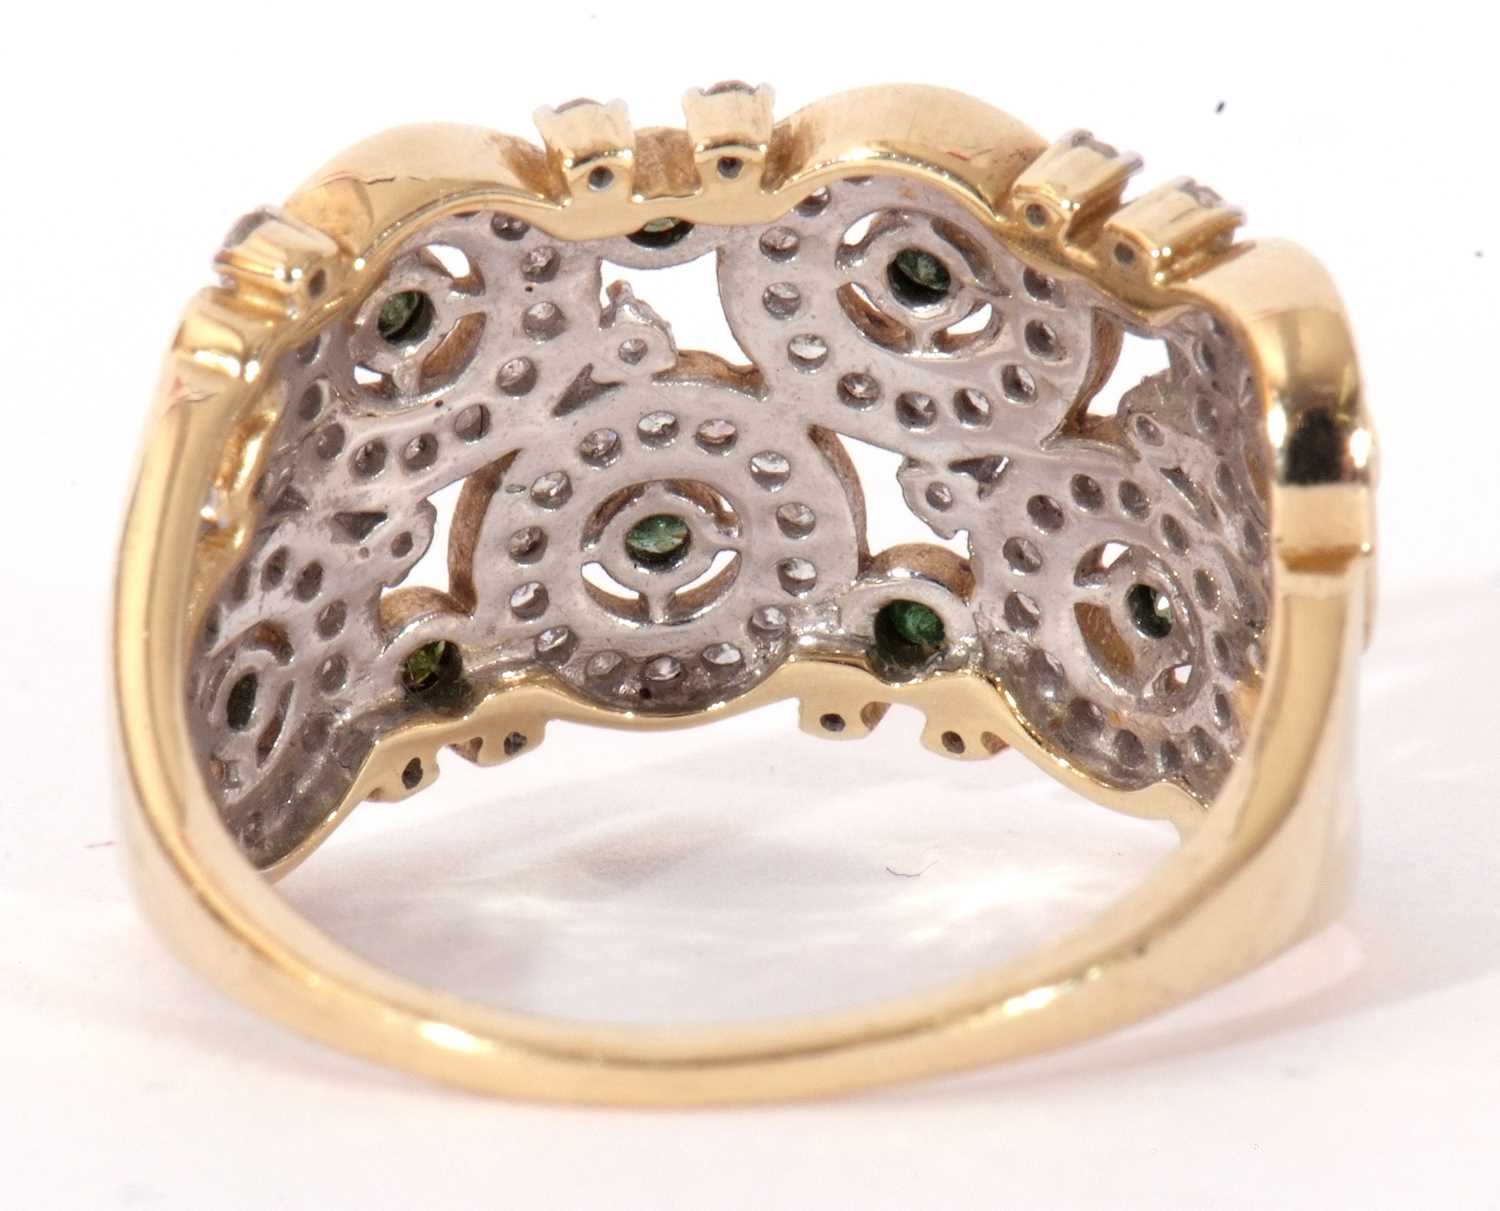 Modern 9ct gold, diamond and green stone set ring, a design featuring six small diamond set discs - Image 4 of 10